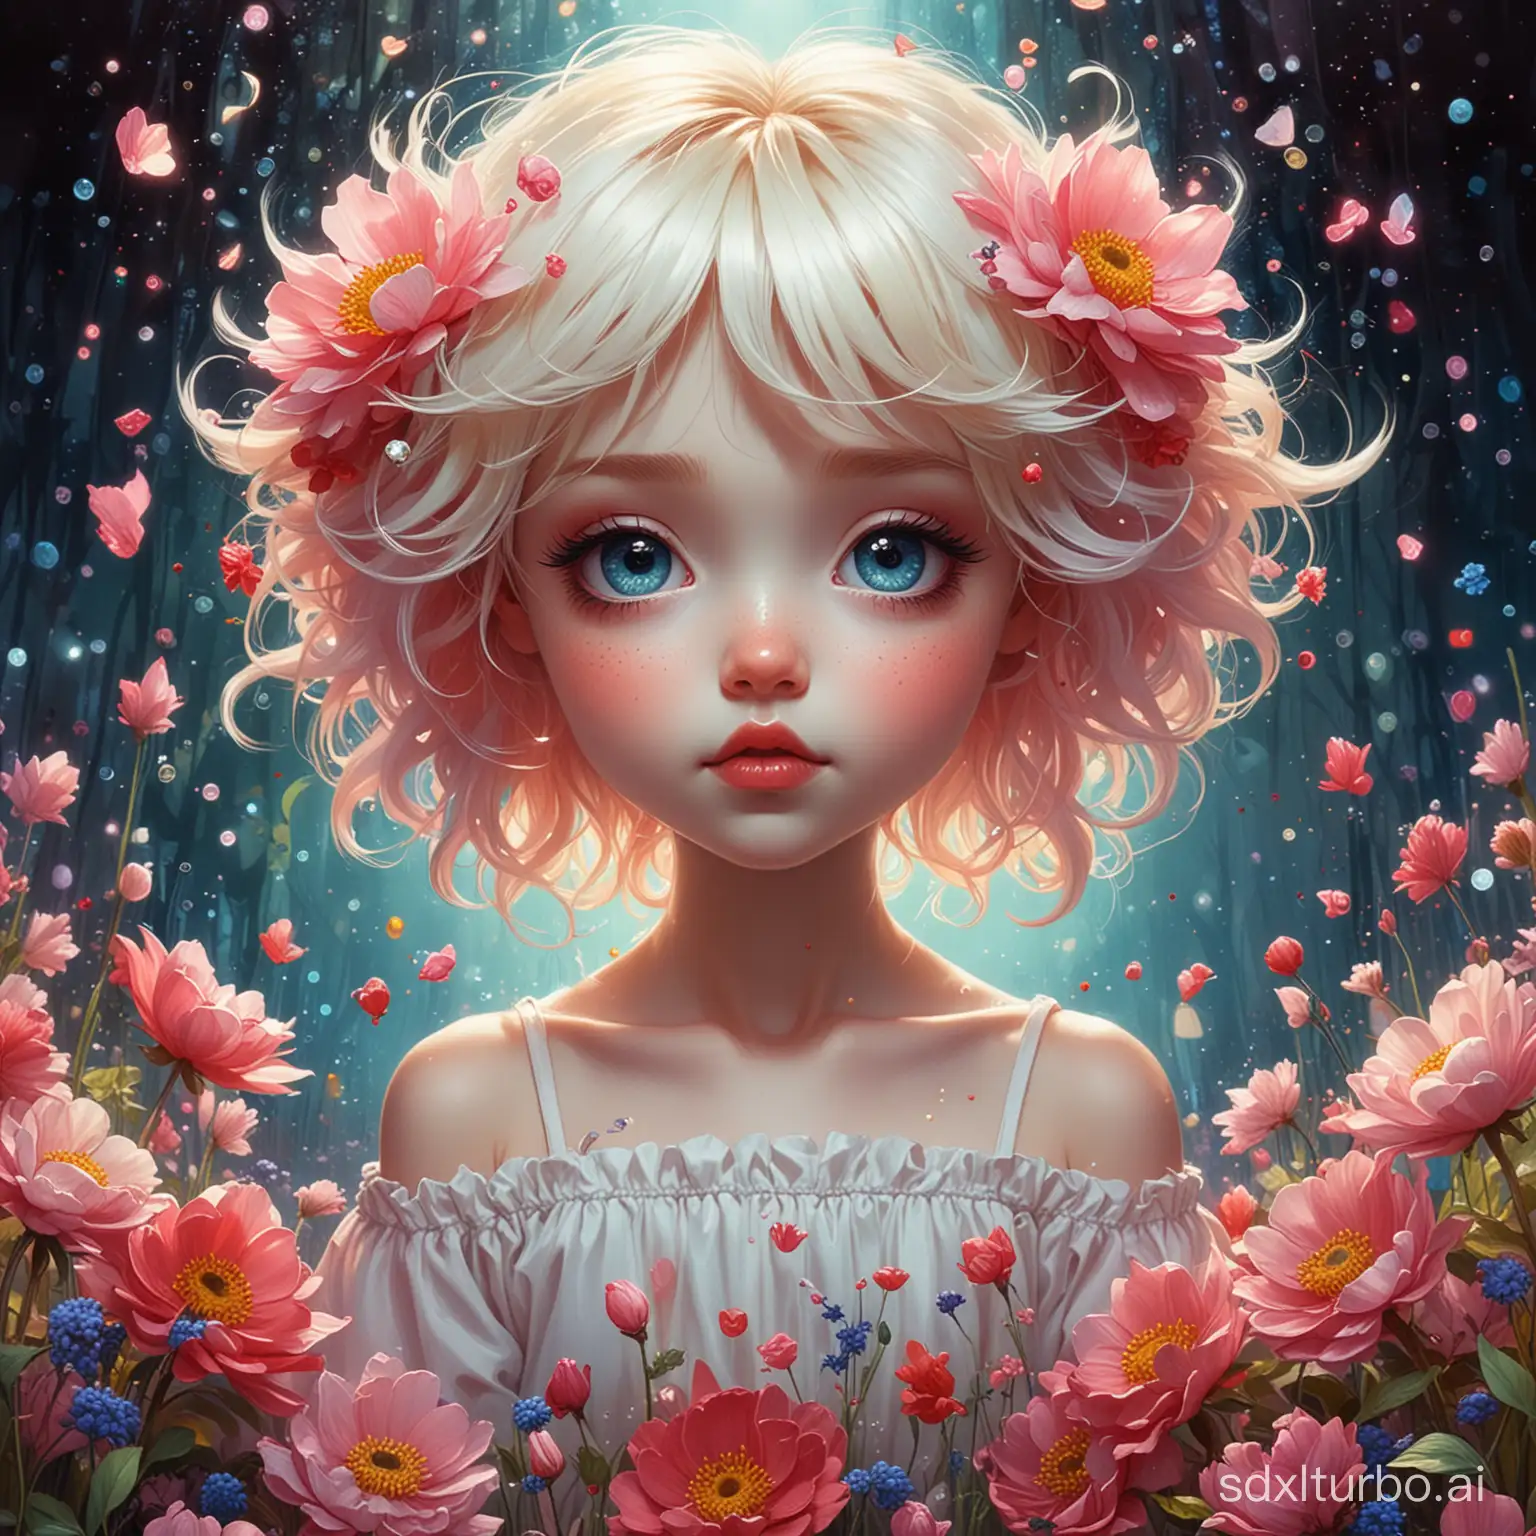 Chibi-Anime-Style-Art-Whimsical-Nature-Scenes-by-Yvonne-Coomber-Meghan-Howland-and-Phil-Koch